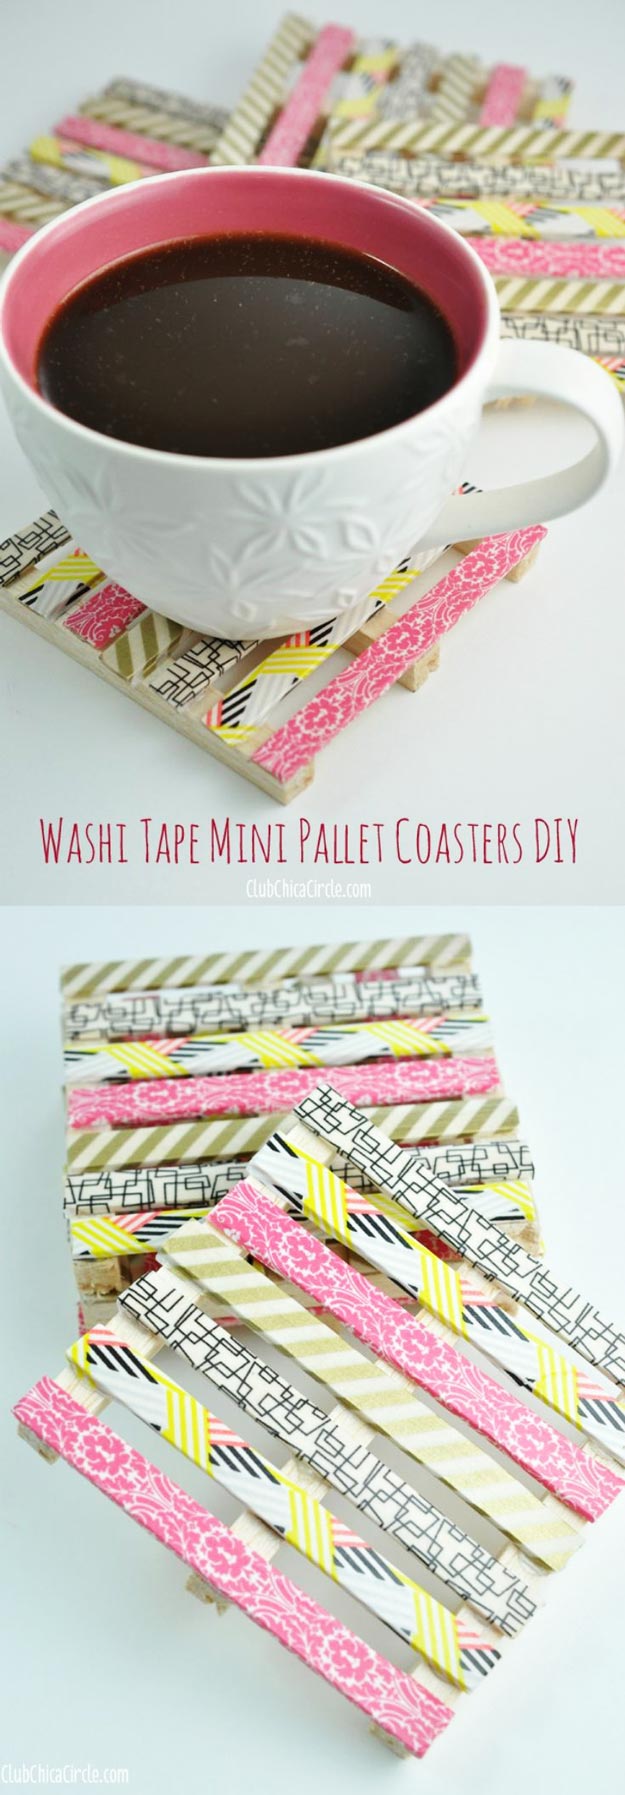 Cool DIY Ideas to Make for DIY Christmas Gifts - Easy Dollar Store Crafts for Teens - Best Washi Tape Crafts - Craft Ideas to Give at Presents to Friends